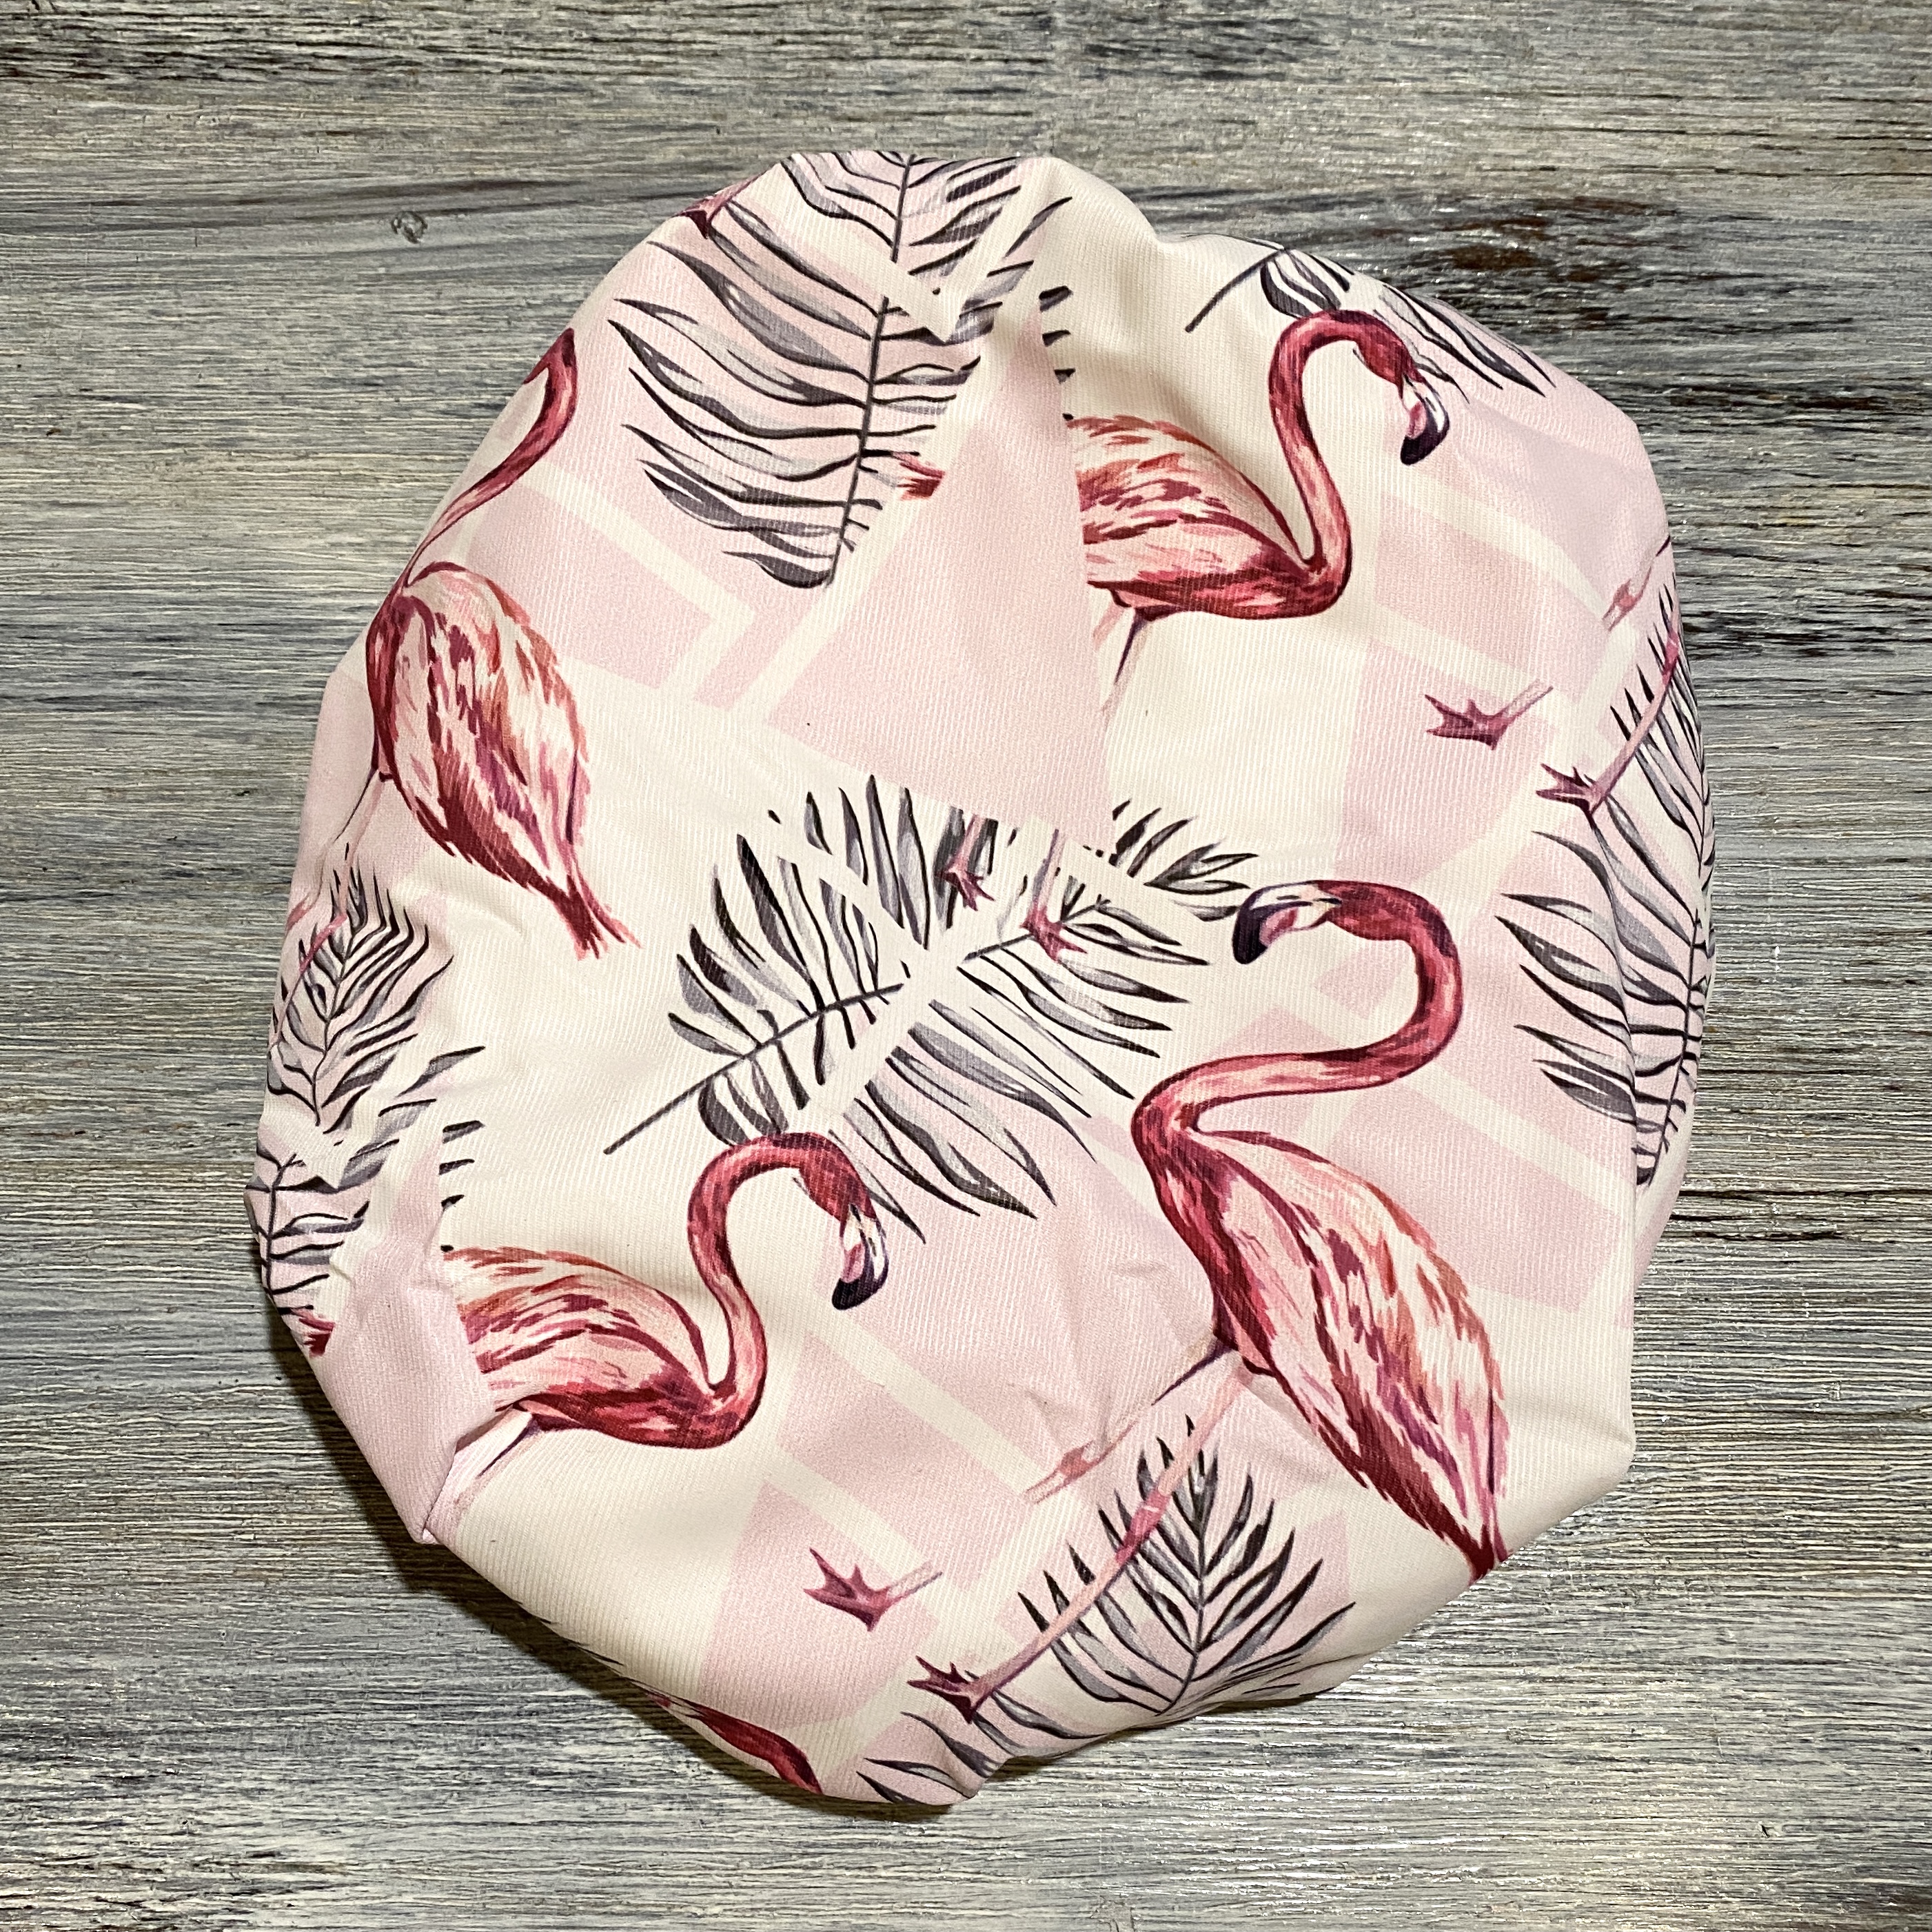 Top of The Vintage Cosmetic Company Shower Cap for Bombay and Cedar Lifestyle Box September 2021